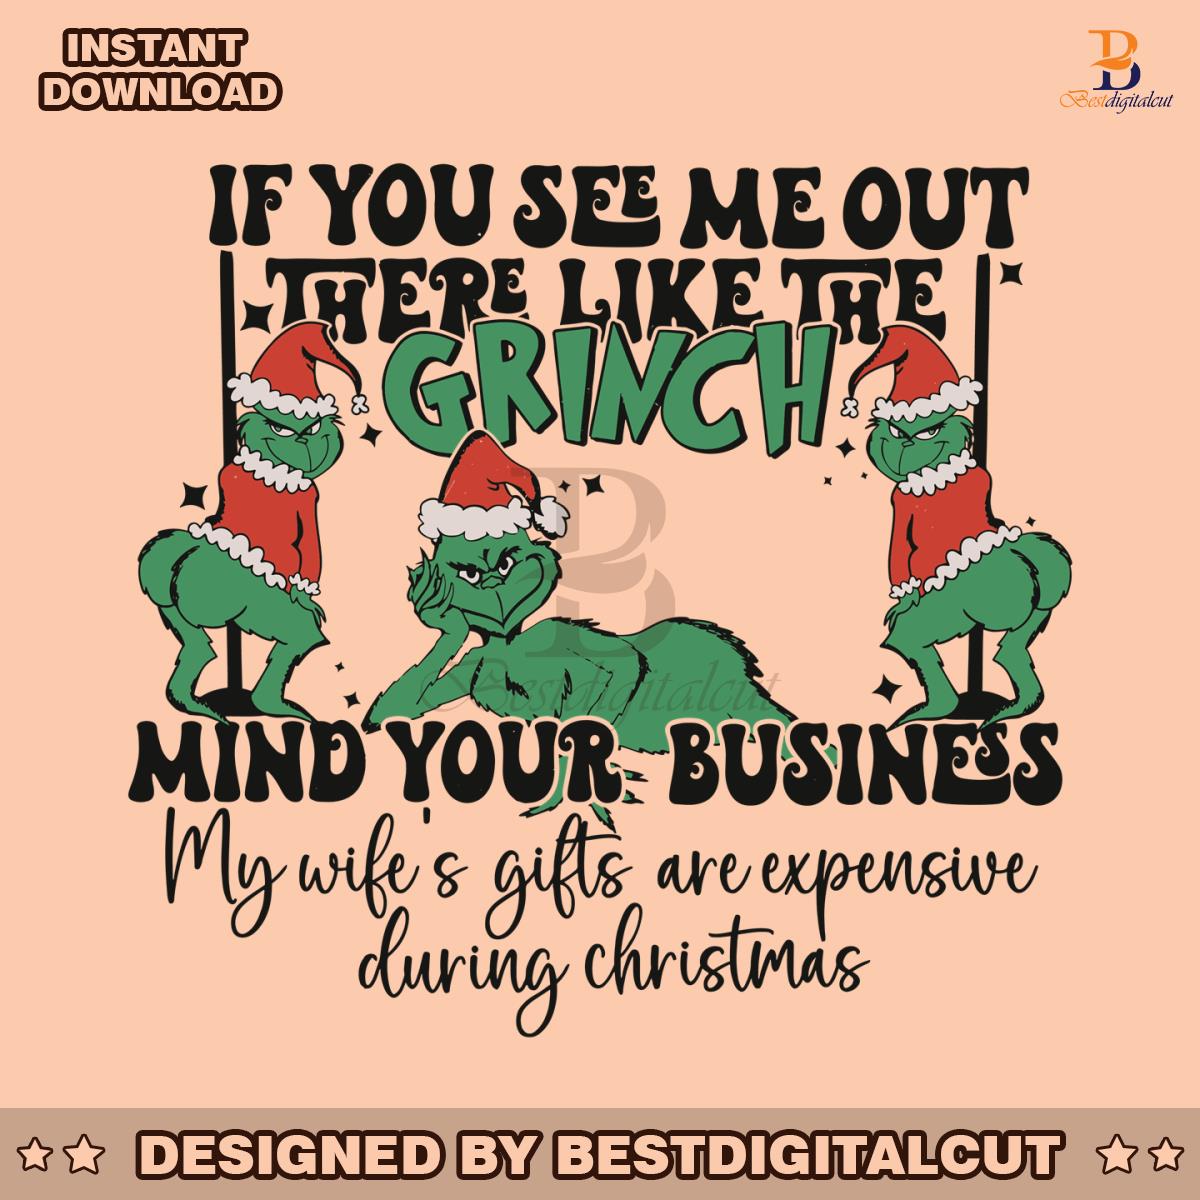 if-you-see-me-out-there-like-the-grinch-svg-cricut-files